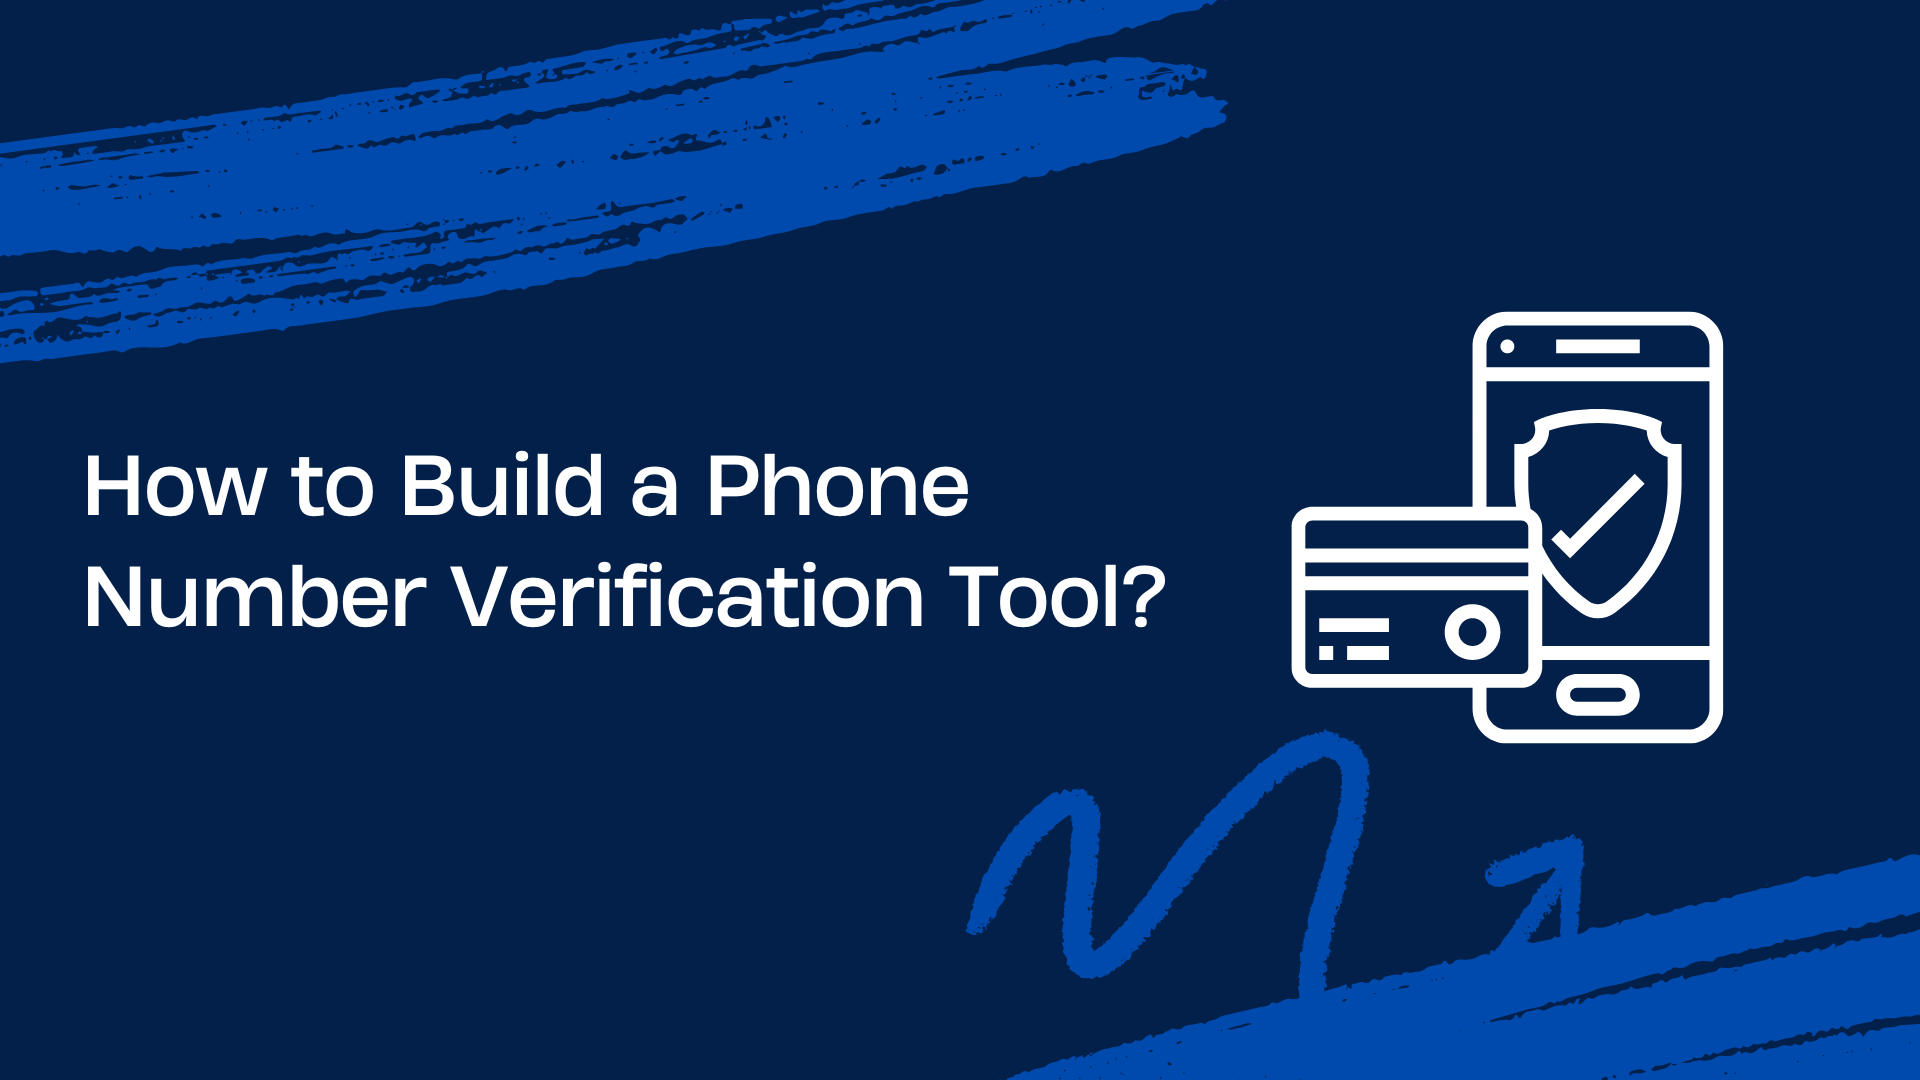 How to Build a Phone Number Verification Tool